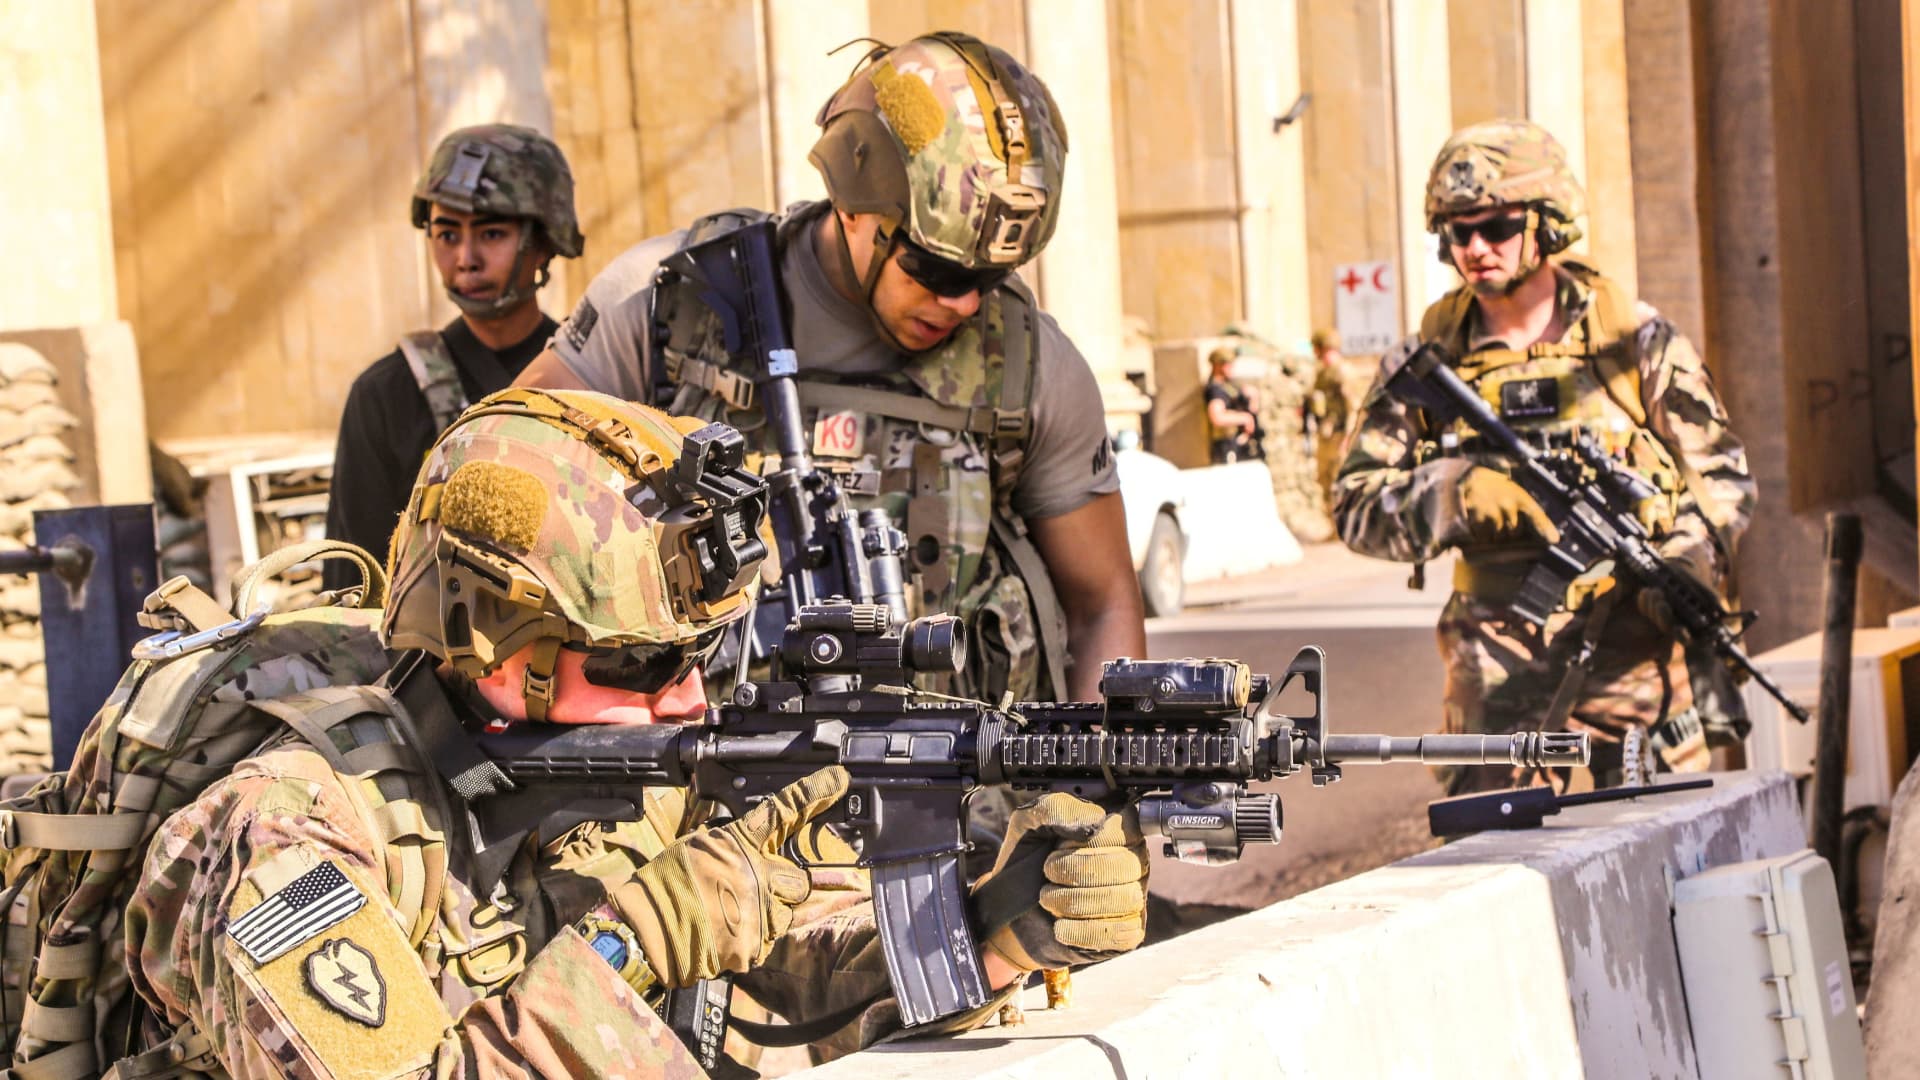 U.S. Army soldiers from 1st Brigade, 25th Infantry Division, Task Force-Iraq, man a defensive position at Forward Operating Base Union III in Baghdad, Iraq, December 31, 2019.